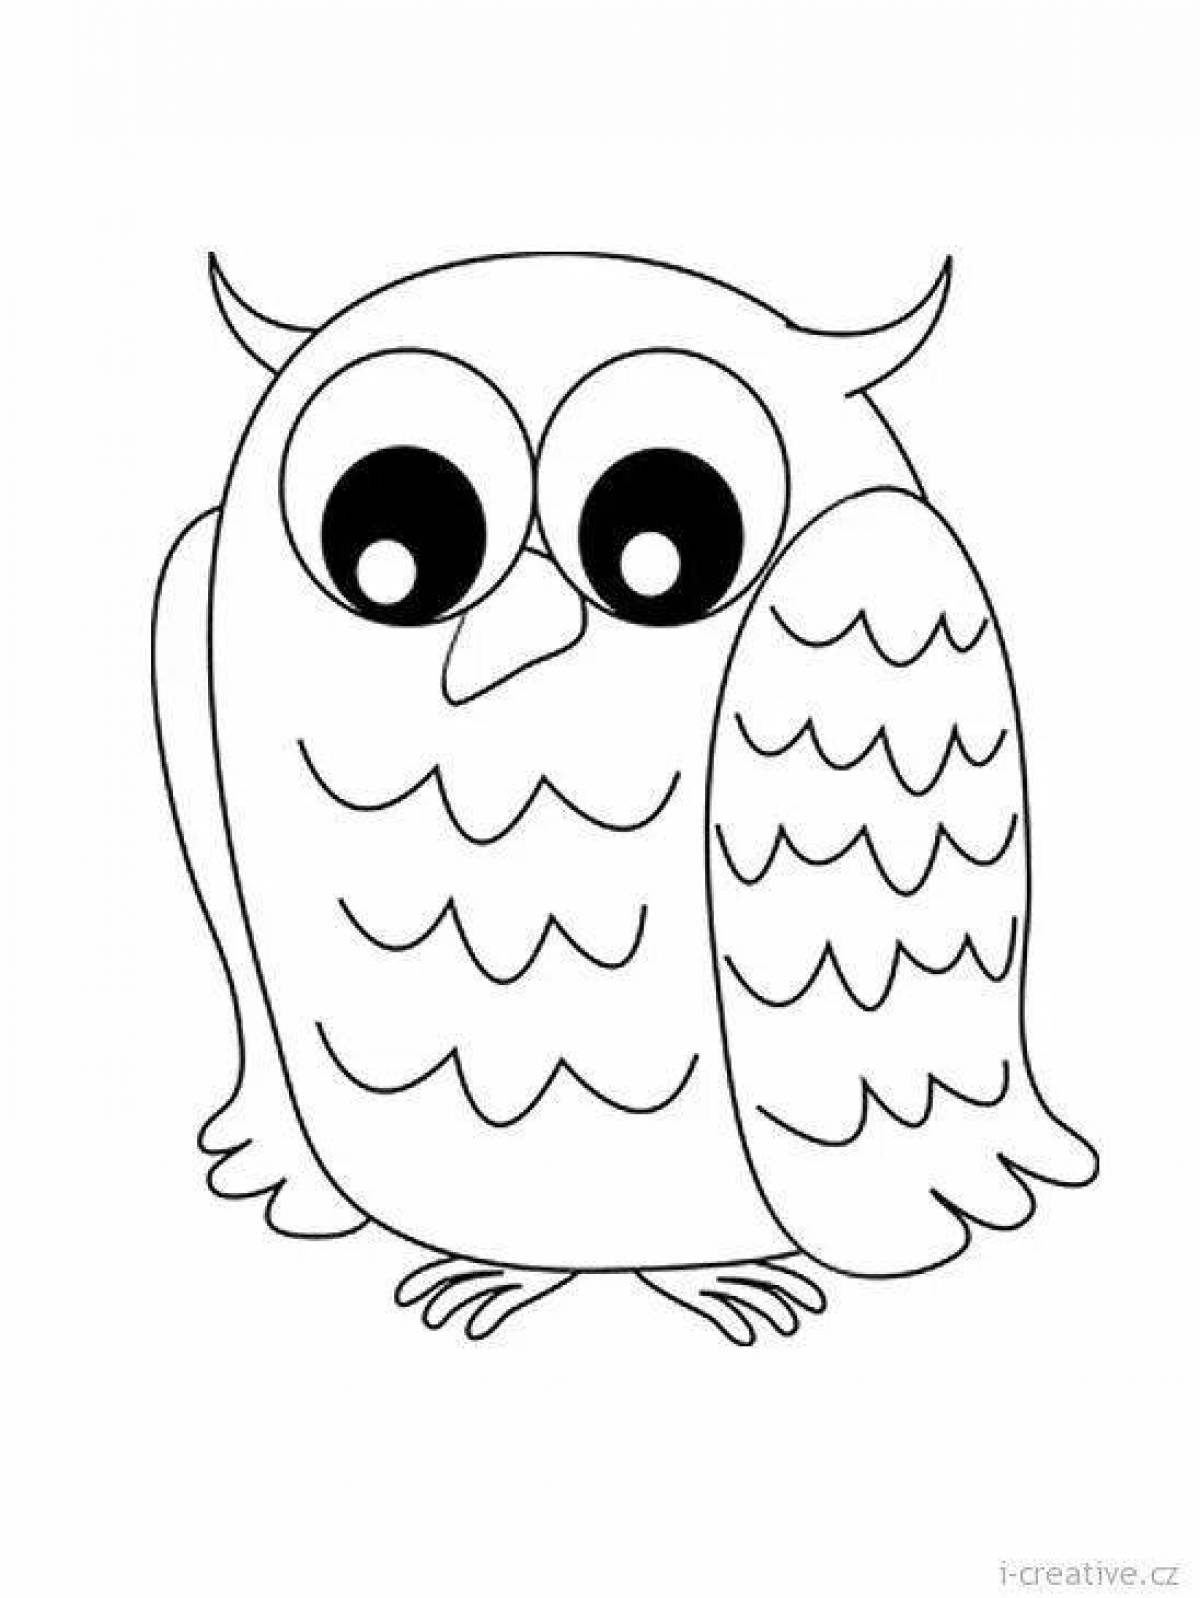 Glowing snowy owl coloring page